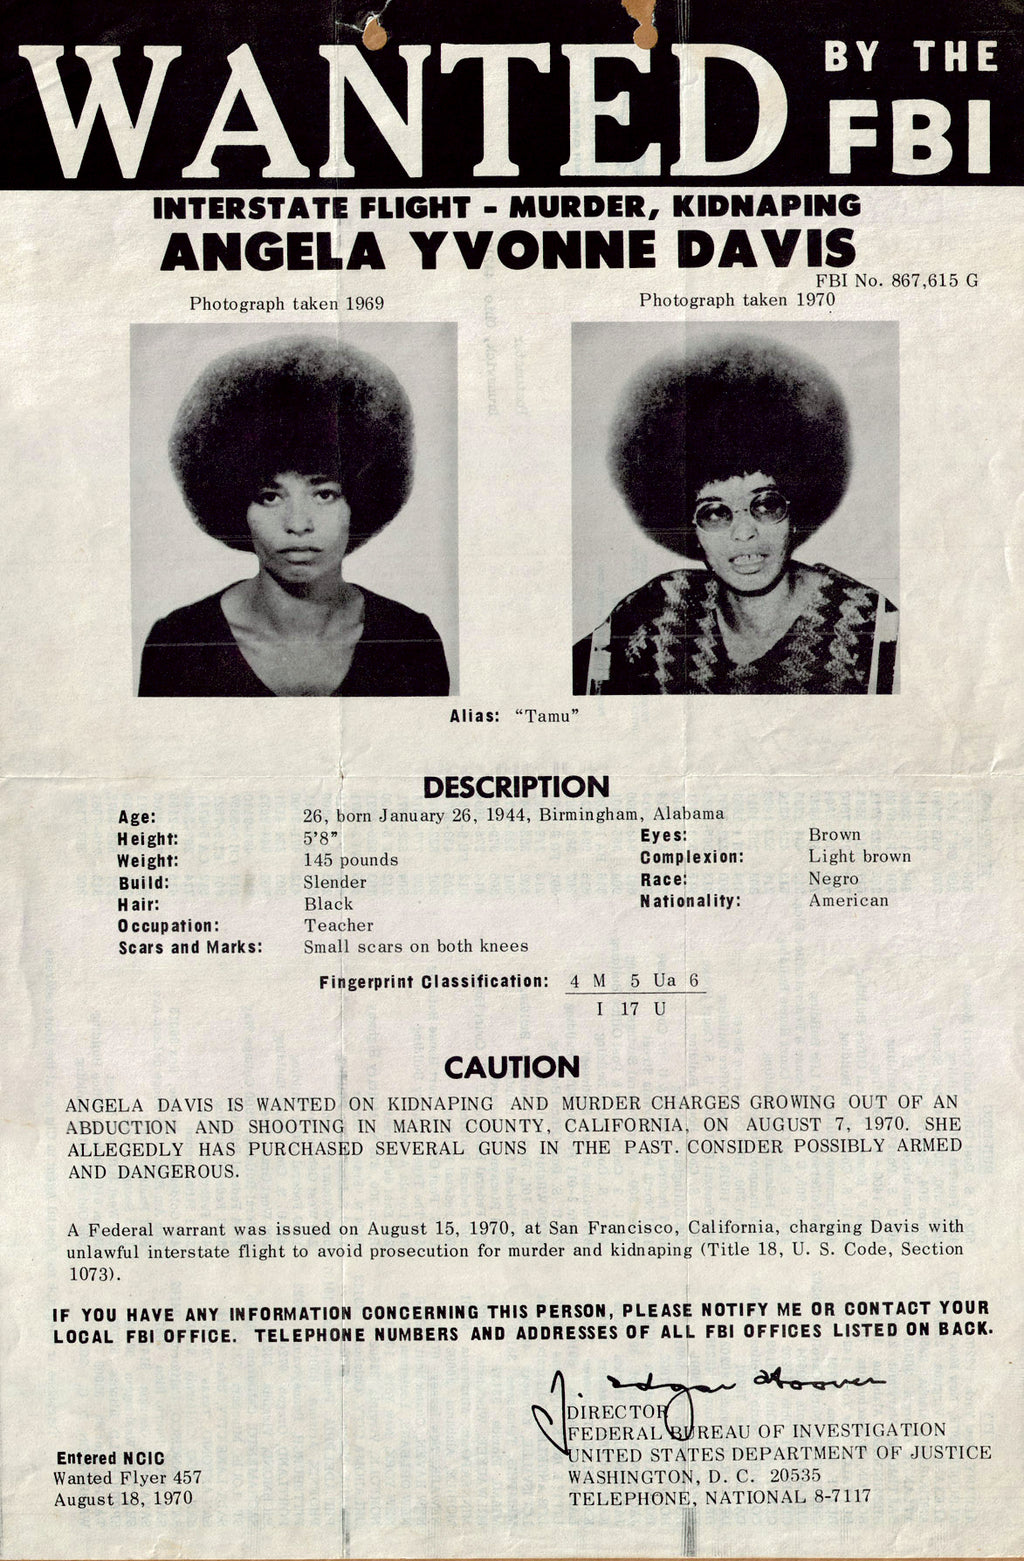 ANGELA DAVIS IS WANTED ON KIDNAPING AND MURDER CHARGES GROWING OUT OF AN ABDUCTION AND SHOOTING IN MARIN COUNTY, CALIFORNIA, ON AUGUST 7, 1970. SHE ALLEGEDLY HAS PURCHASED SEVERAL GUNS IN THE PAST. CONSIDER POSSIBLY ARMED AND DANGEROUS